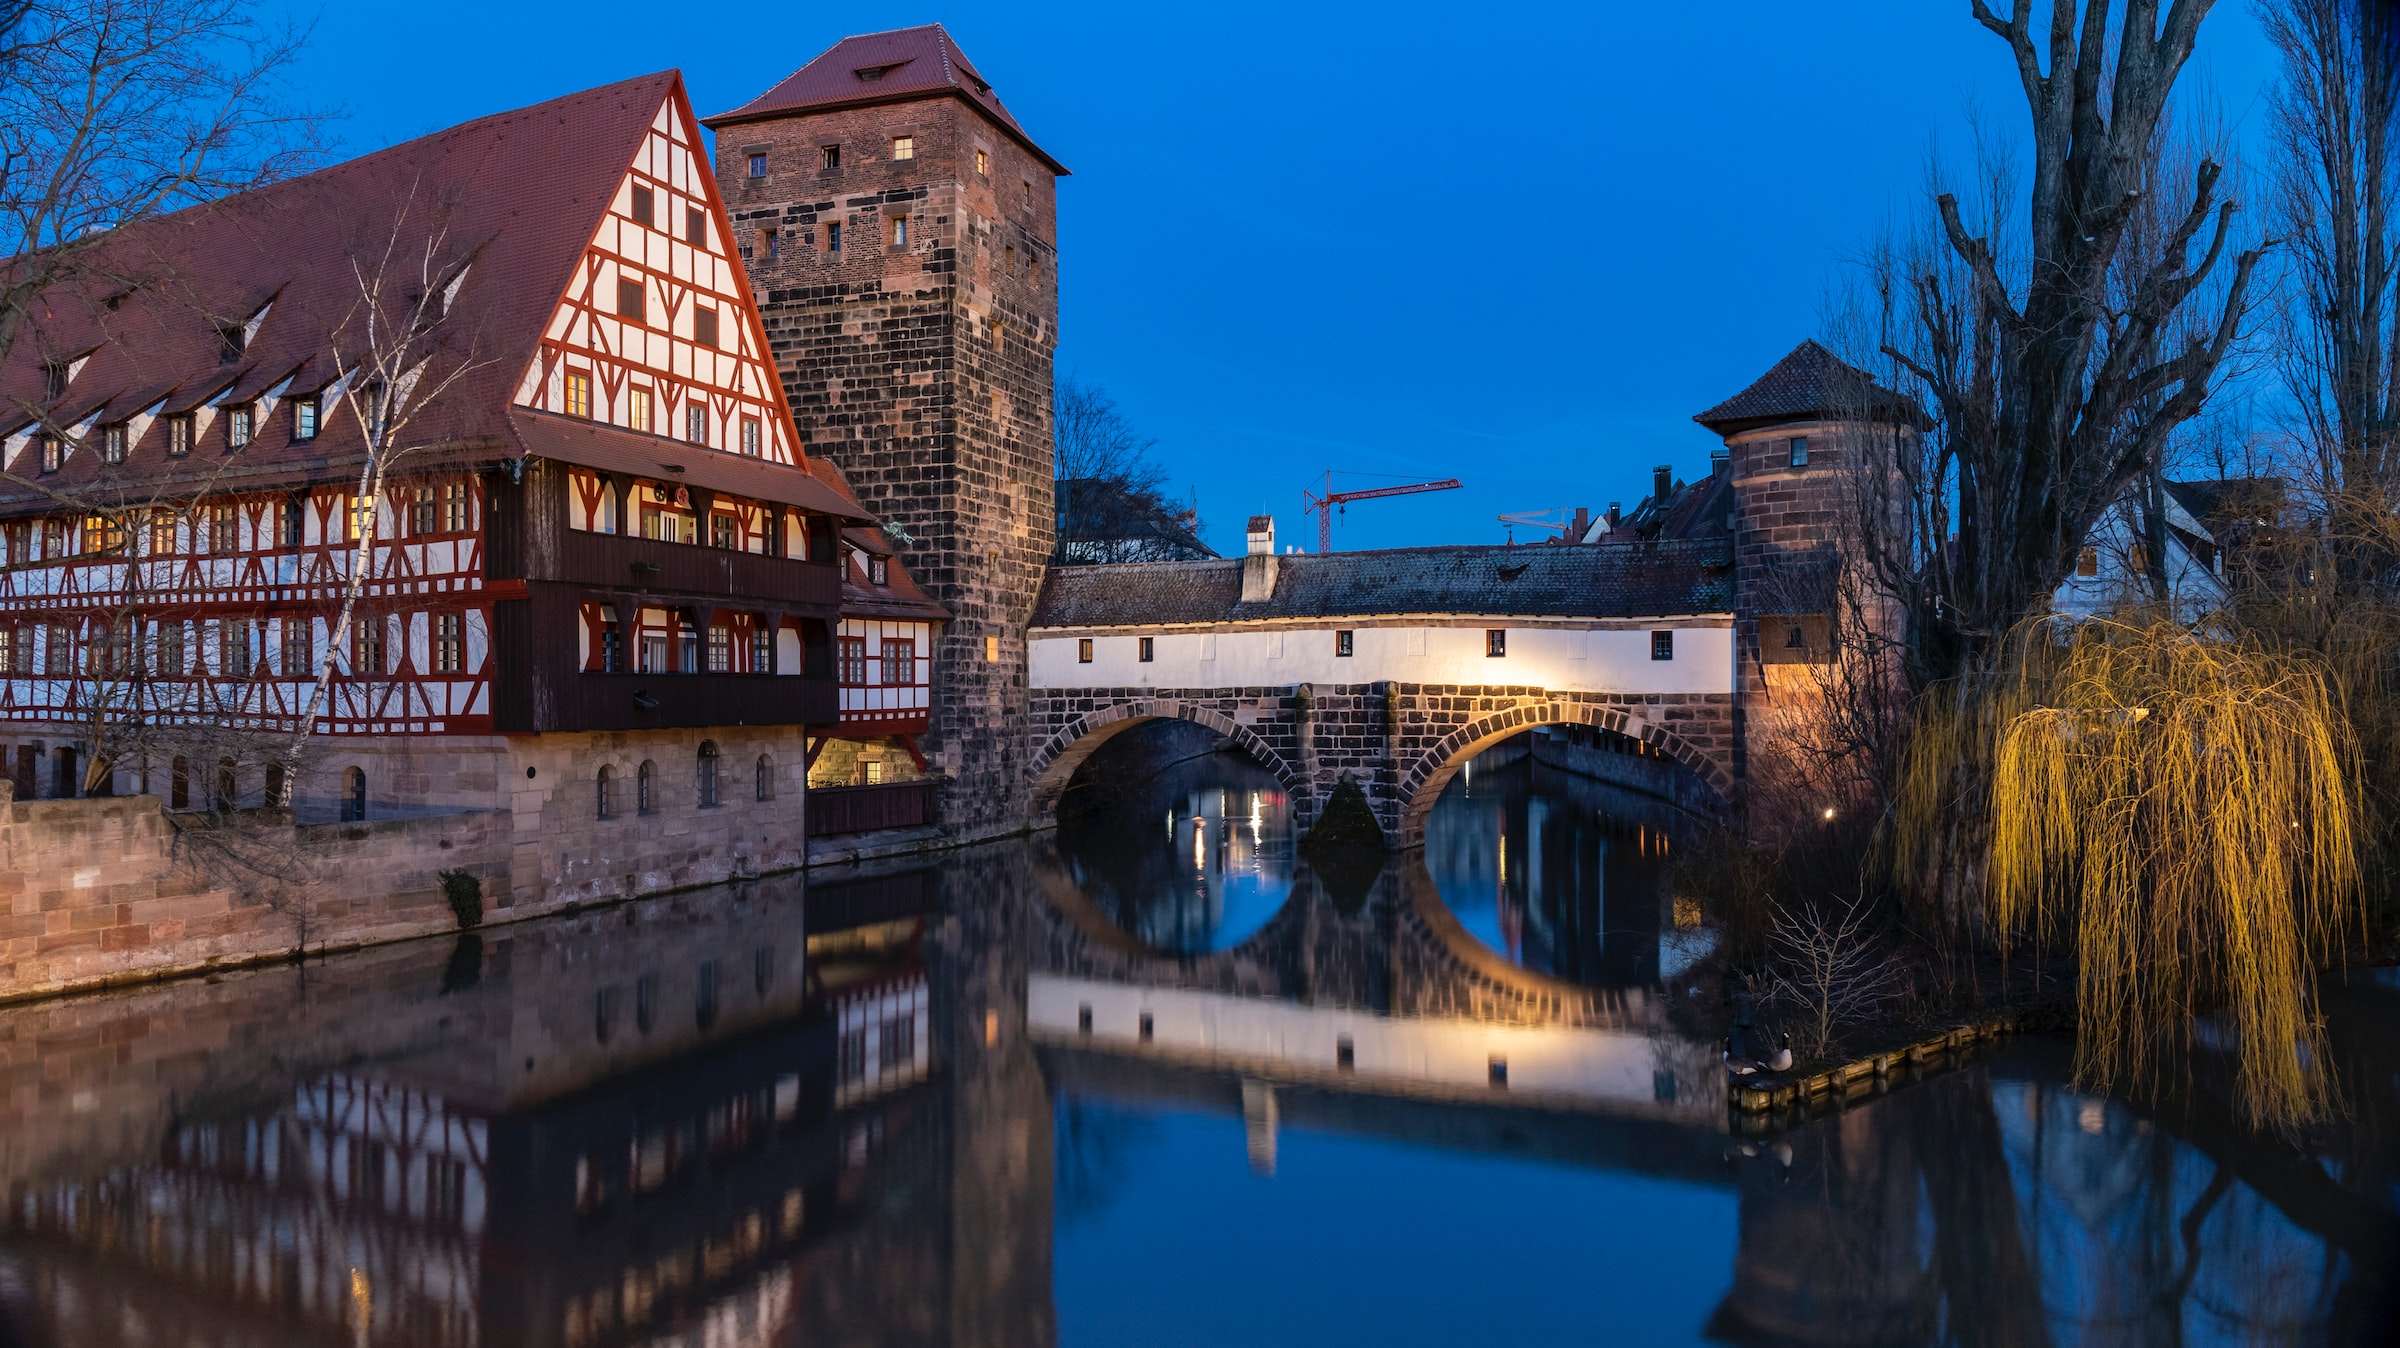 To Nuremberg: A letter to the city I fell in love with and always will